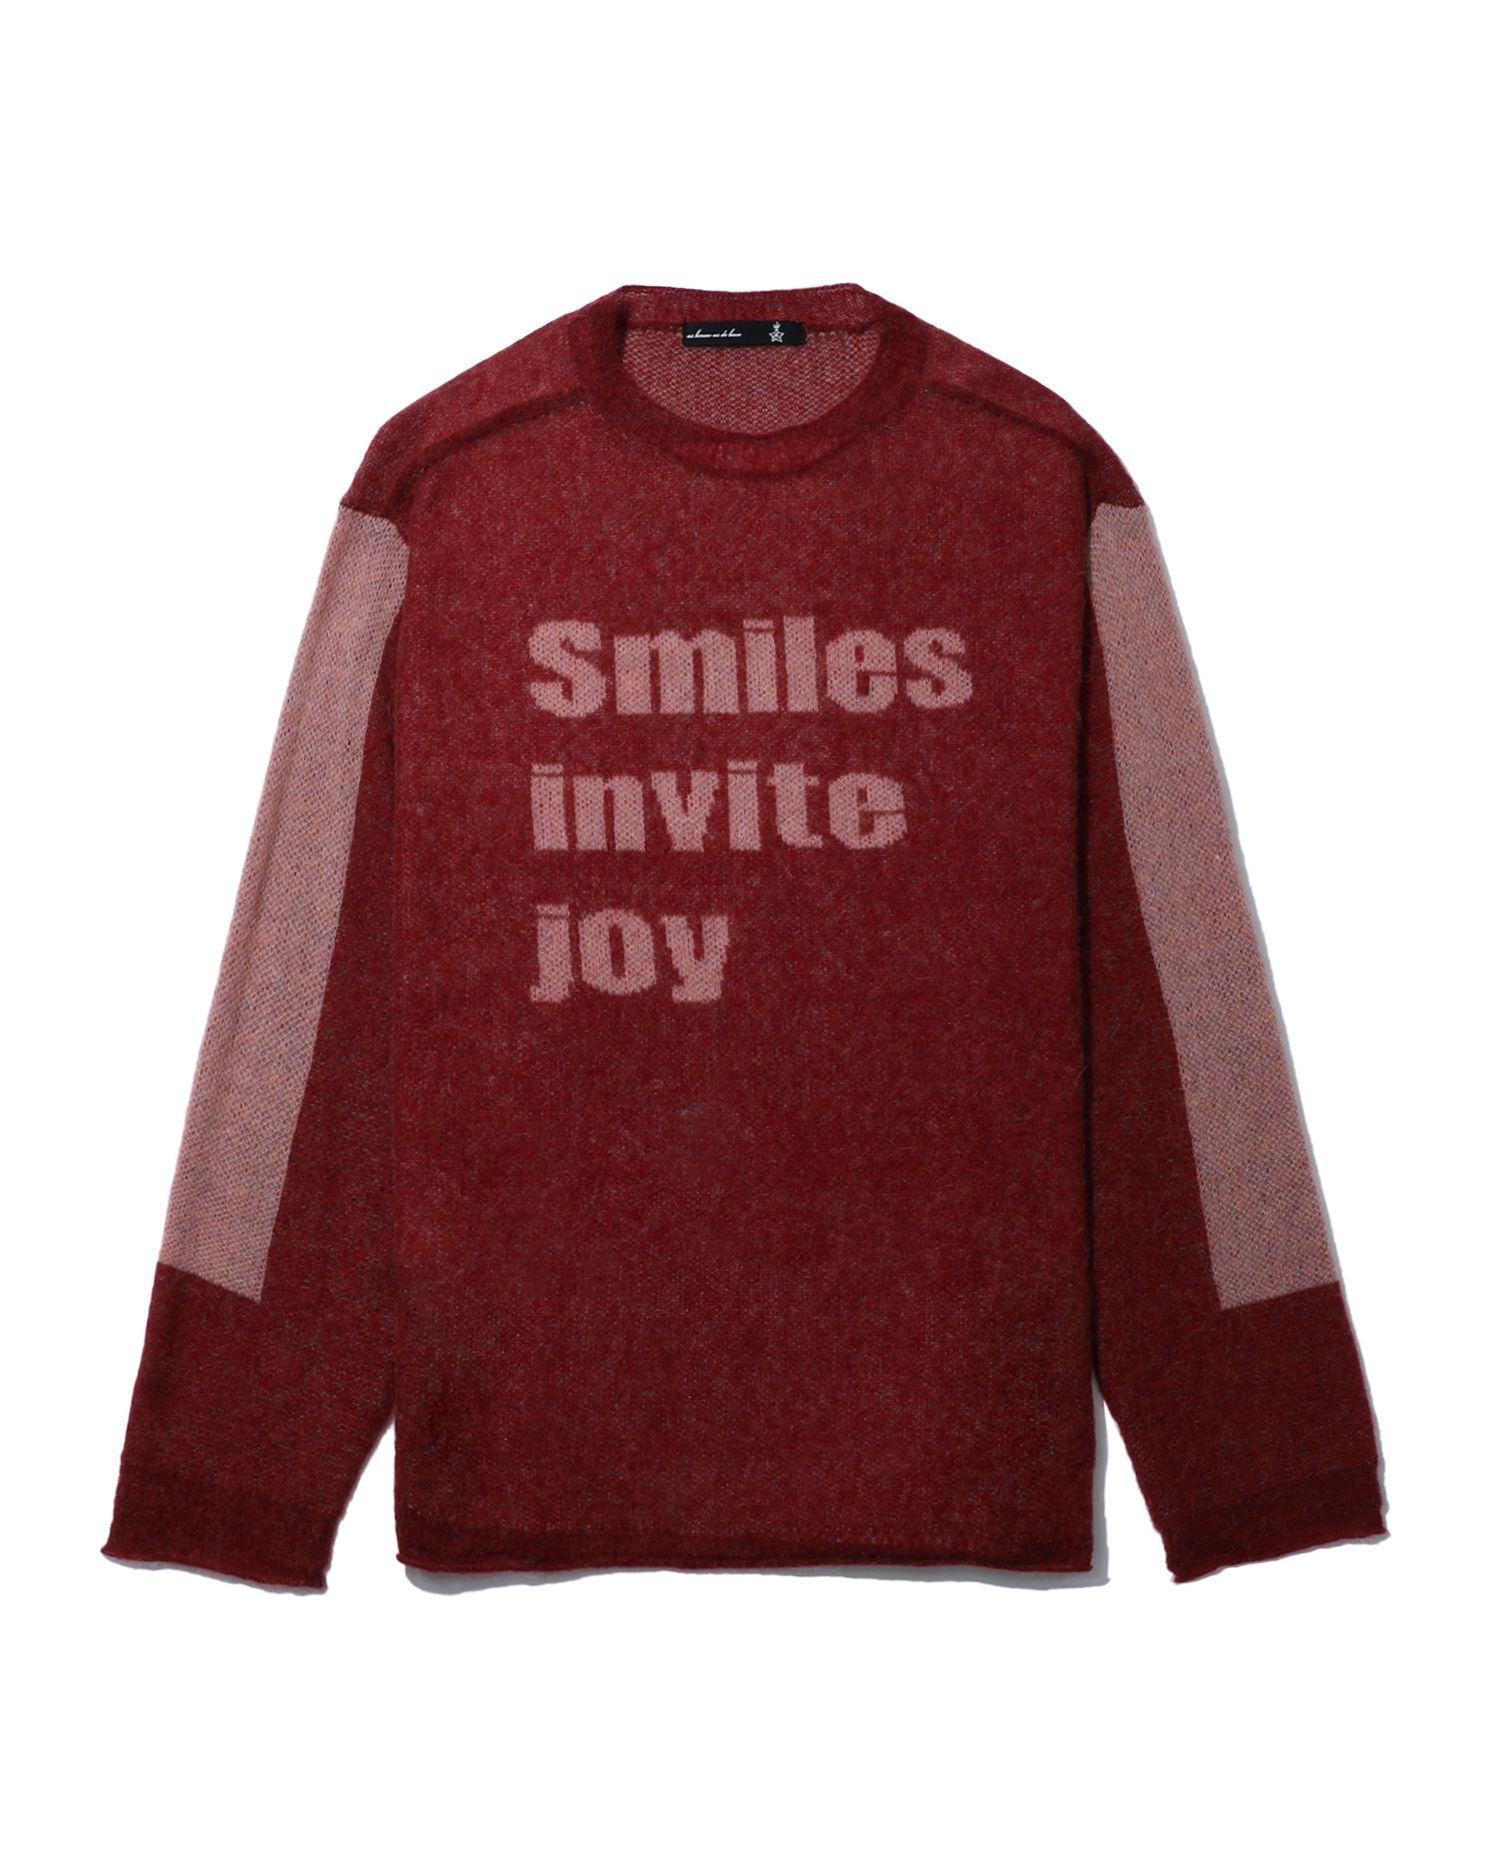 Smiles invite Joy sweater by AS KNOW AS